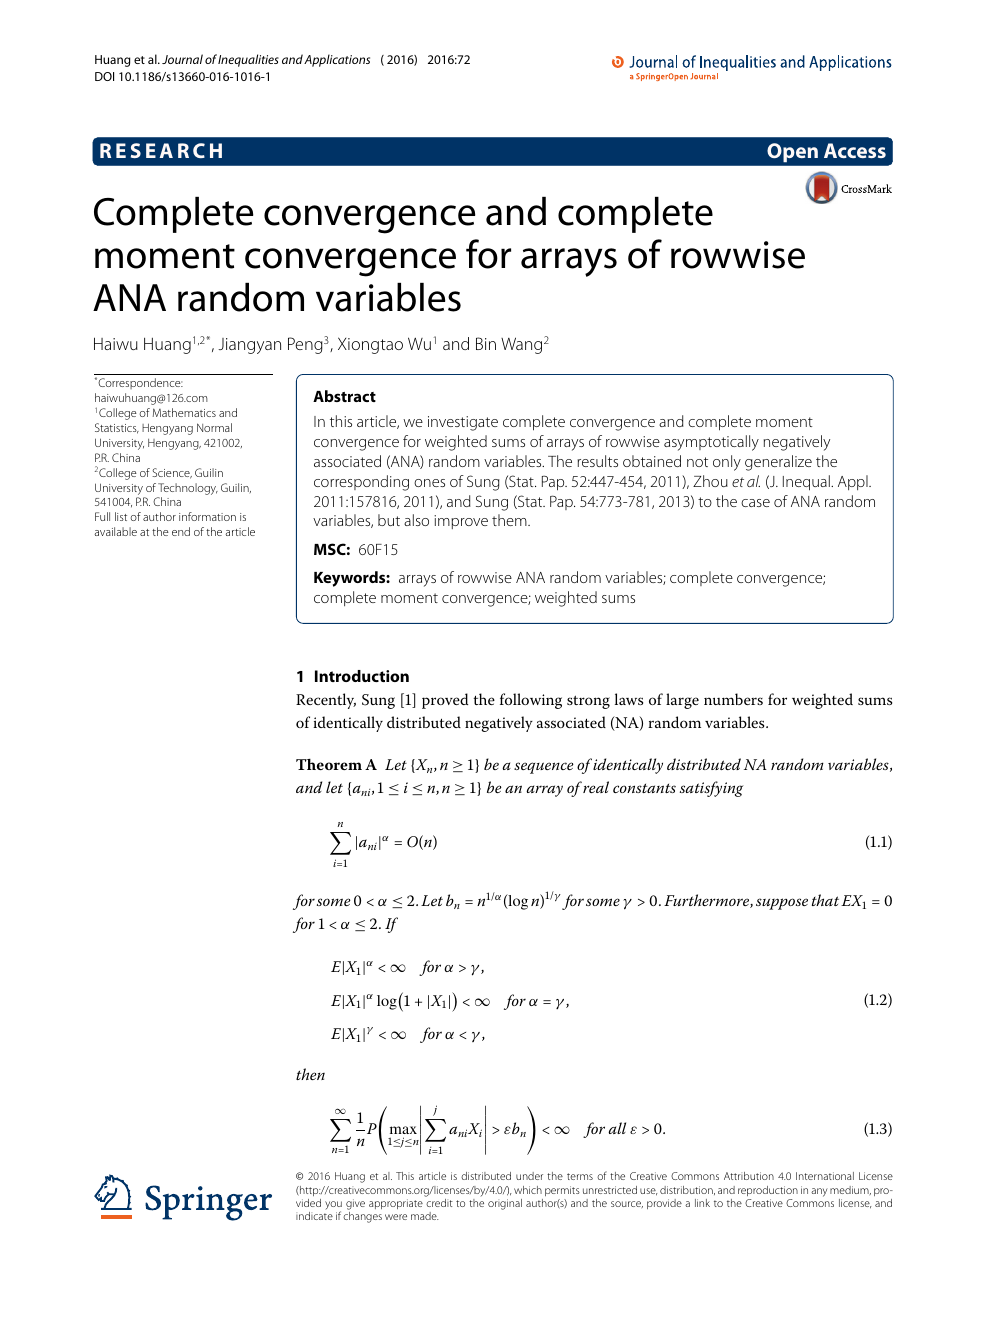 Complete Convergence And Complete Moment Convergence For Arrays Of Rowwise Ana Random Variables Topic Of Research Paper In Mathematics Download Scholarly Article Pdf And Read For Free On Cyberleninka Open Science